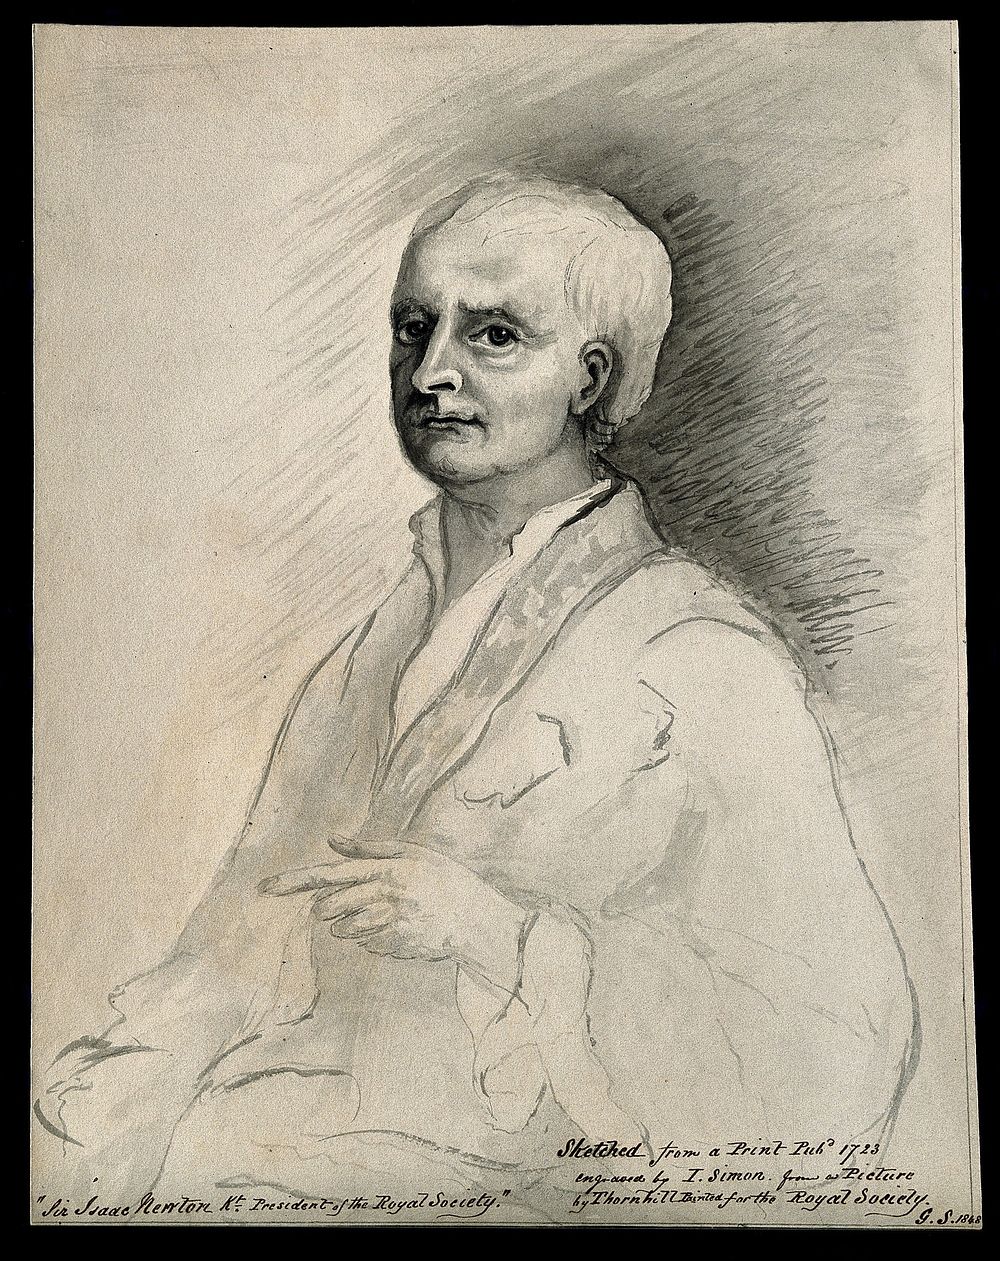 Sir Isaac Newton. Wash drawing by G. S., 1848, after J. Simon, 1723, after Sir J. Thornhill, 1710.